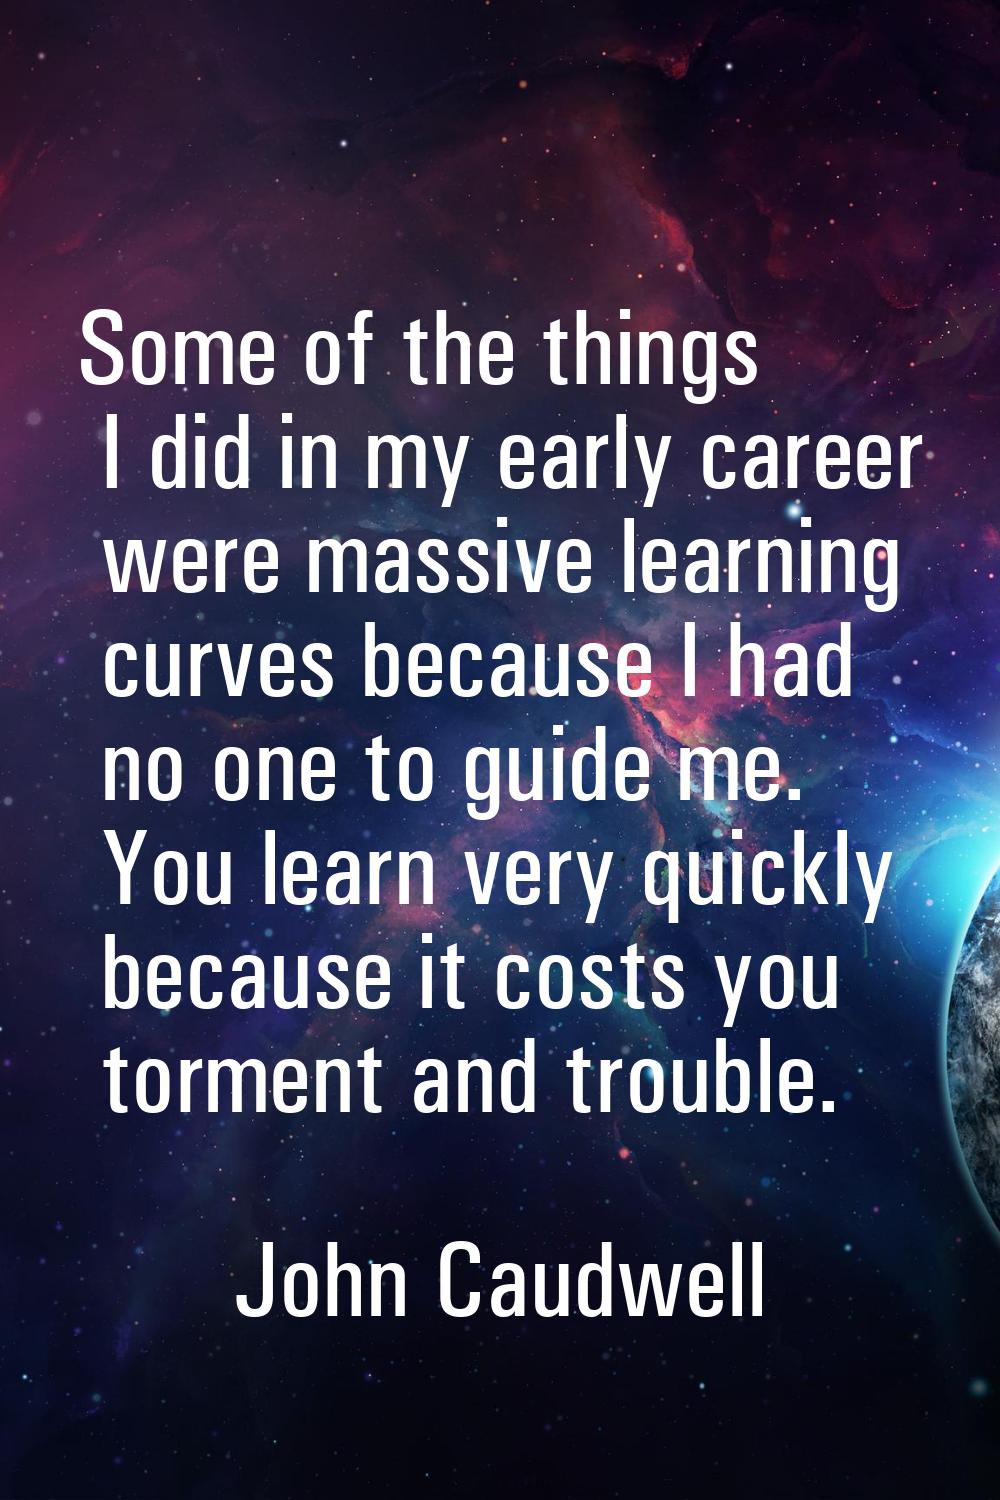 Some of the things I did in my early career were massive learning curves because I had no one to gu